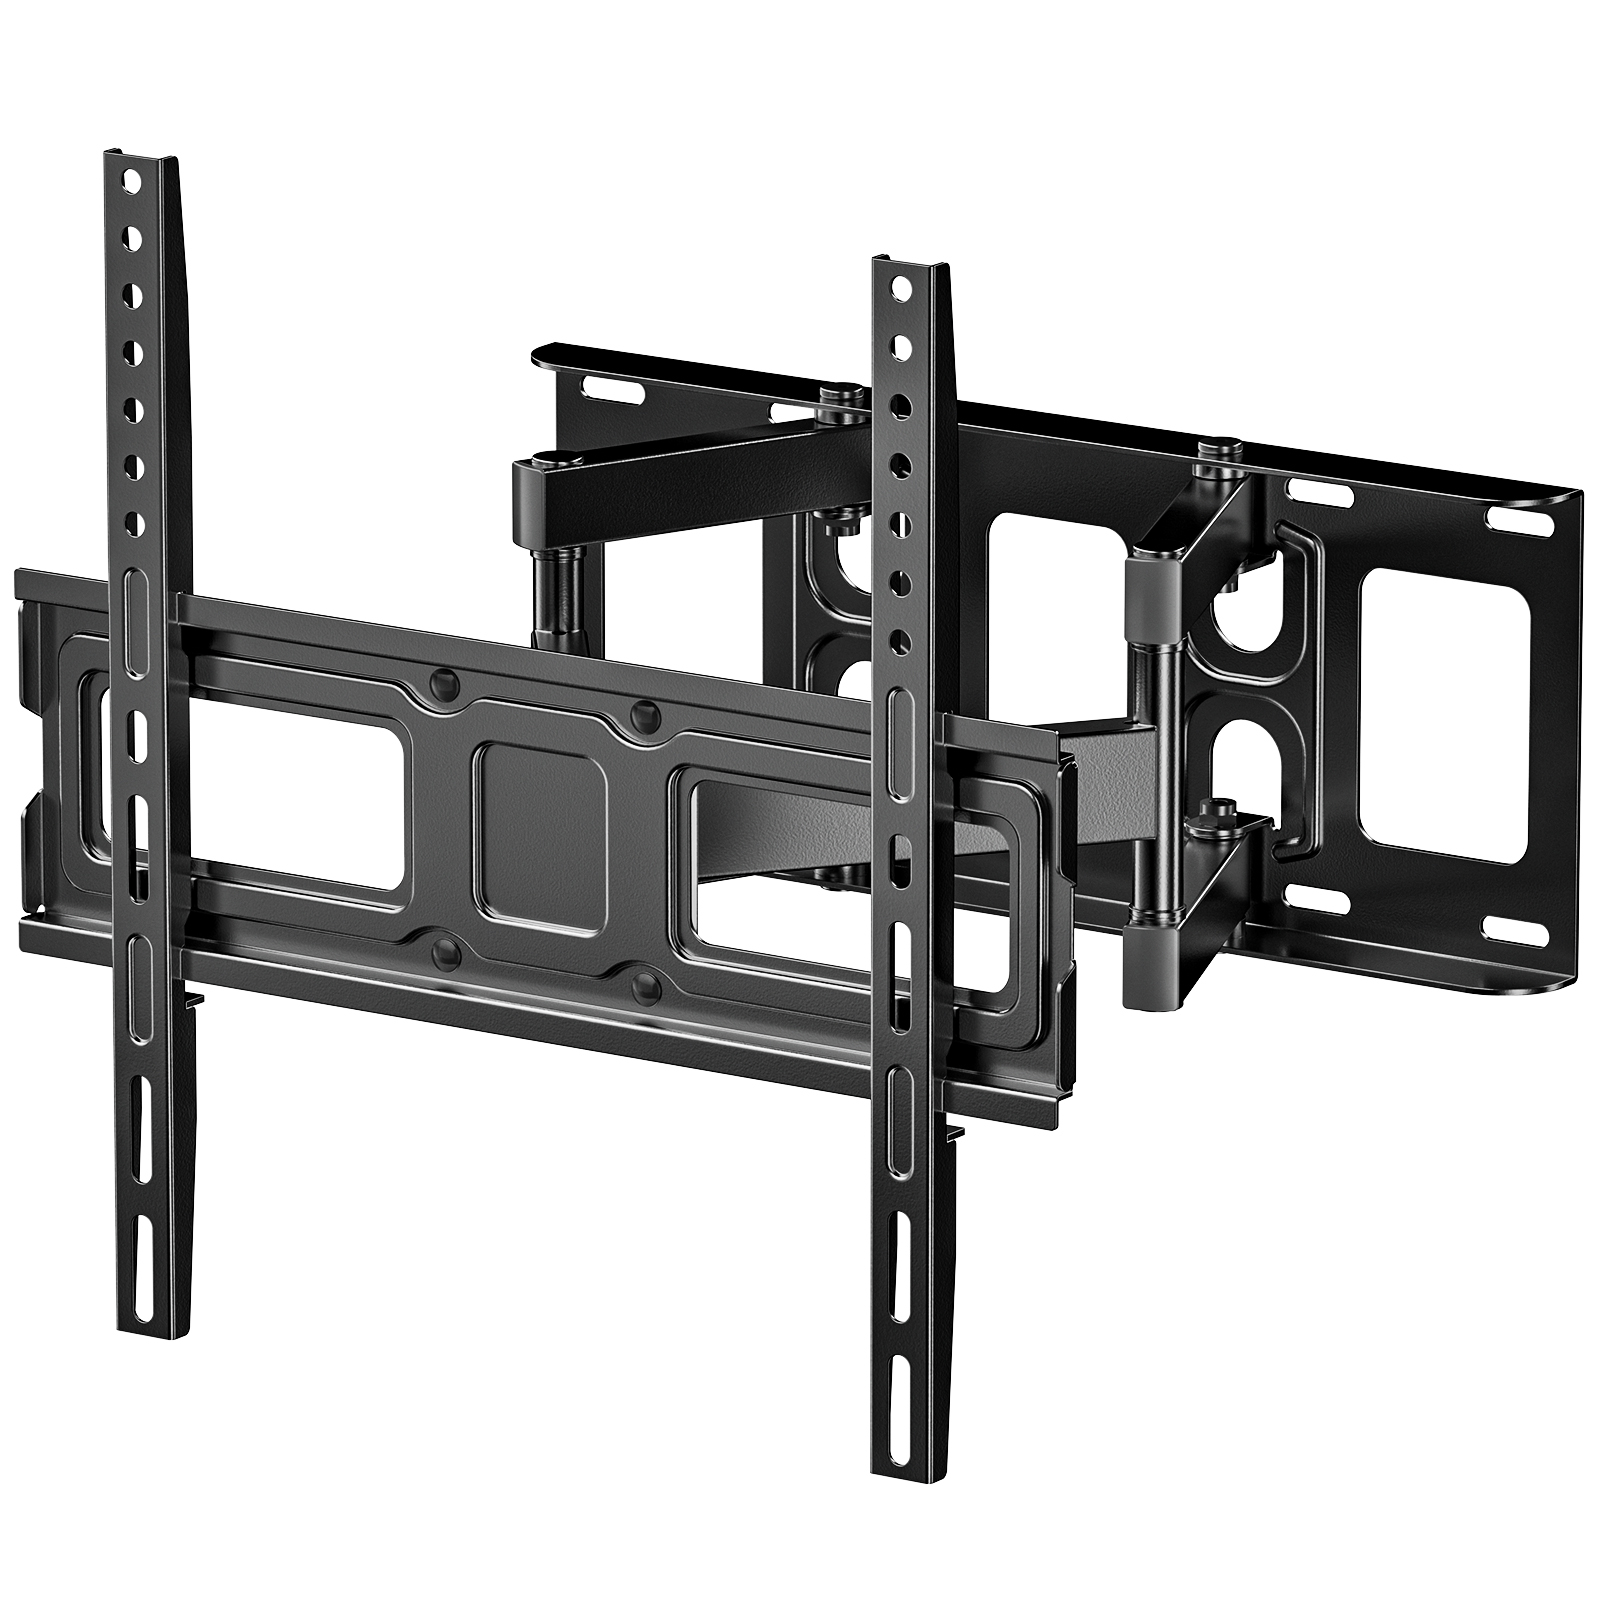 Full Motion Articulating TV Wall Mount  Swivel Tilting Bracket Fit for 26-65 In Flat & Curved TVs - image 1 of 8